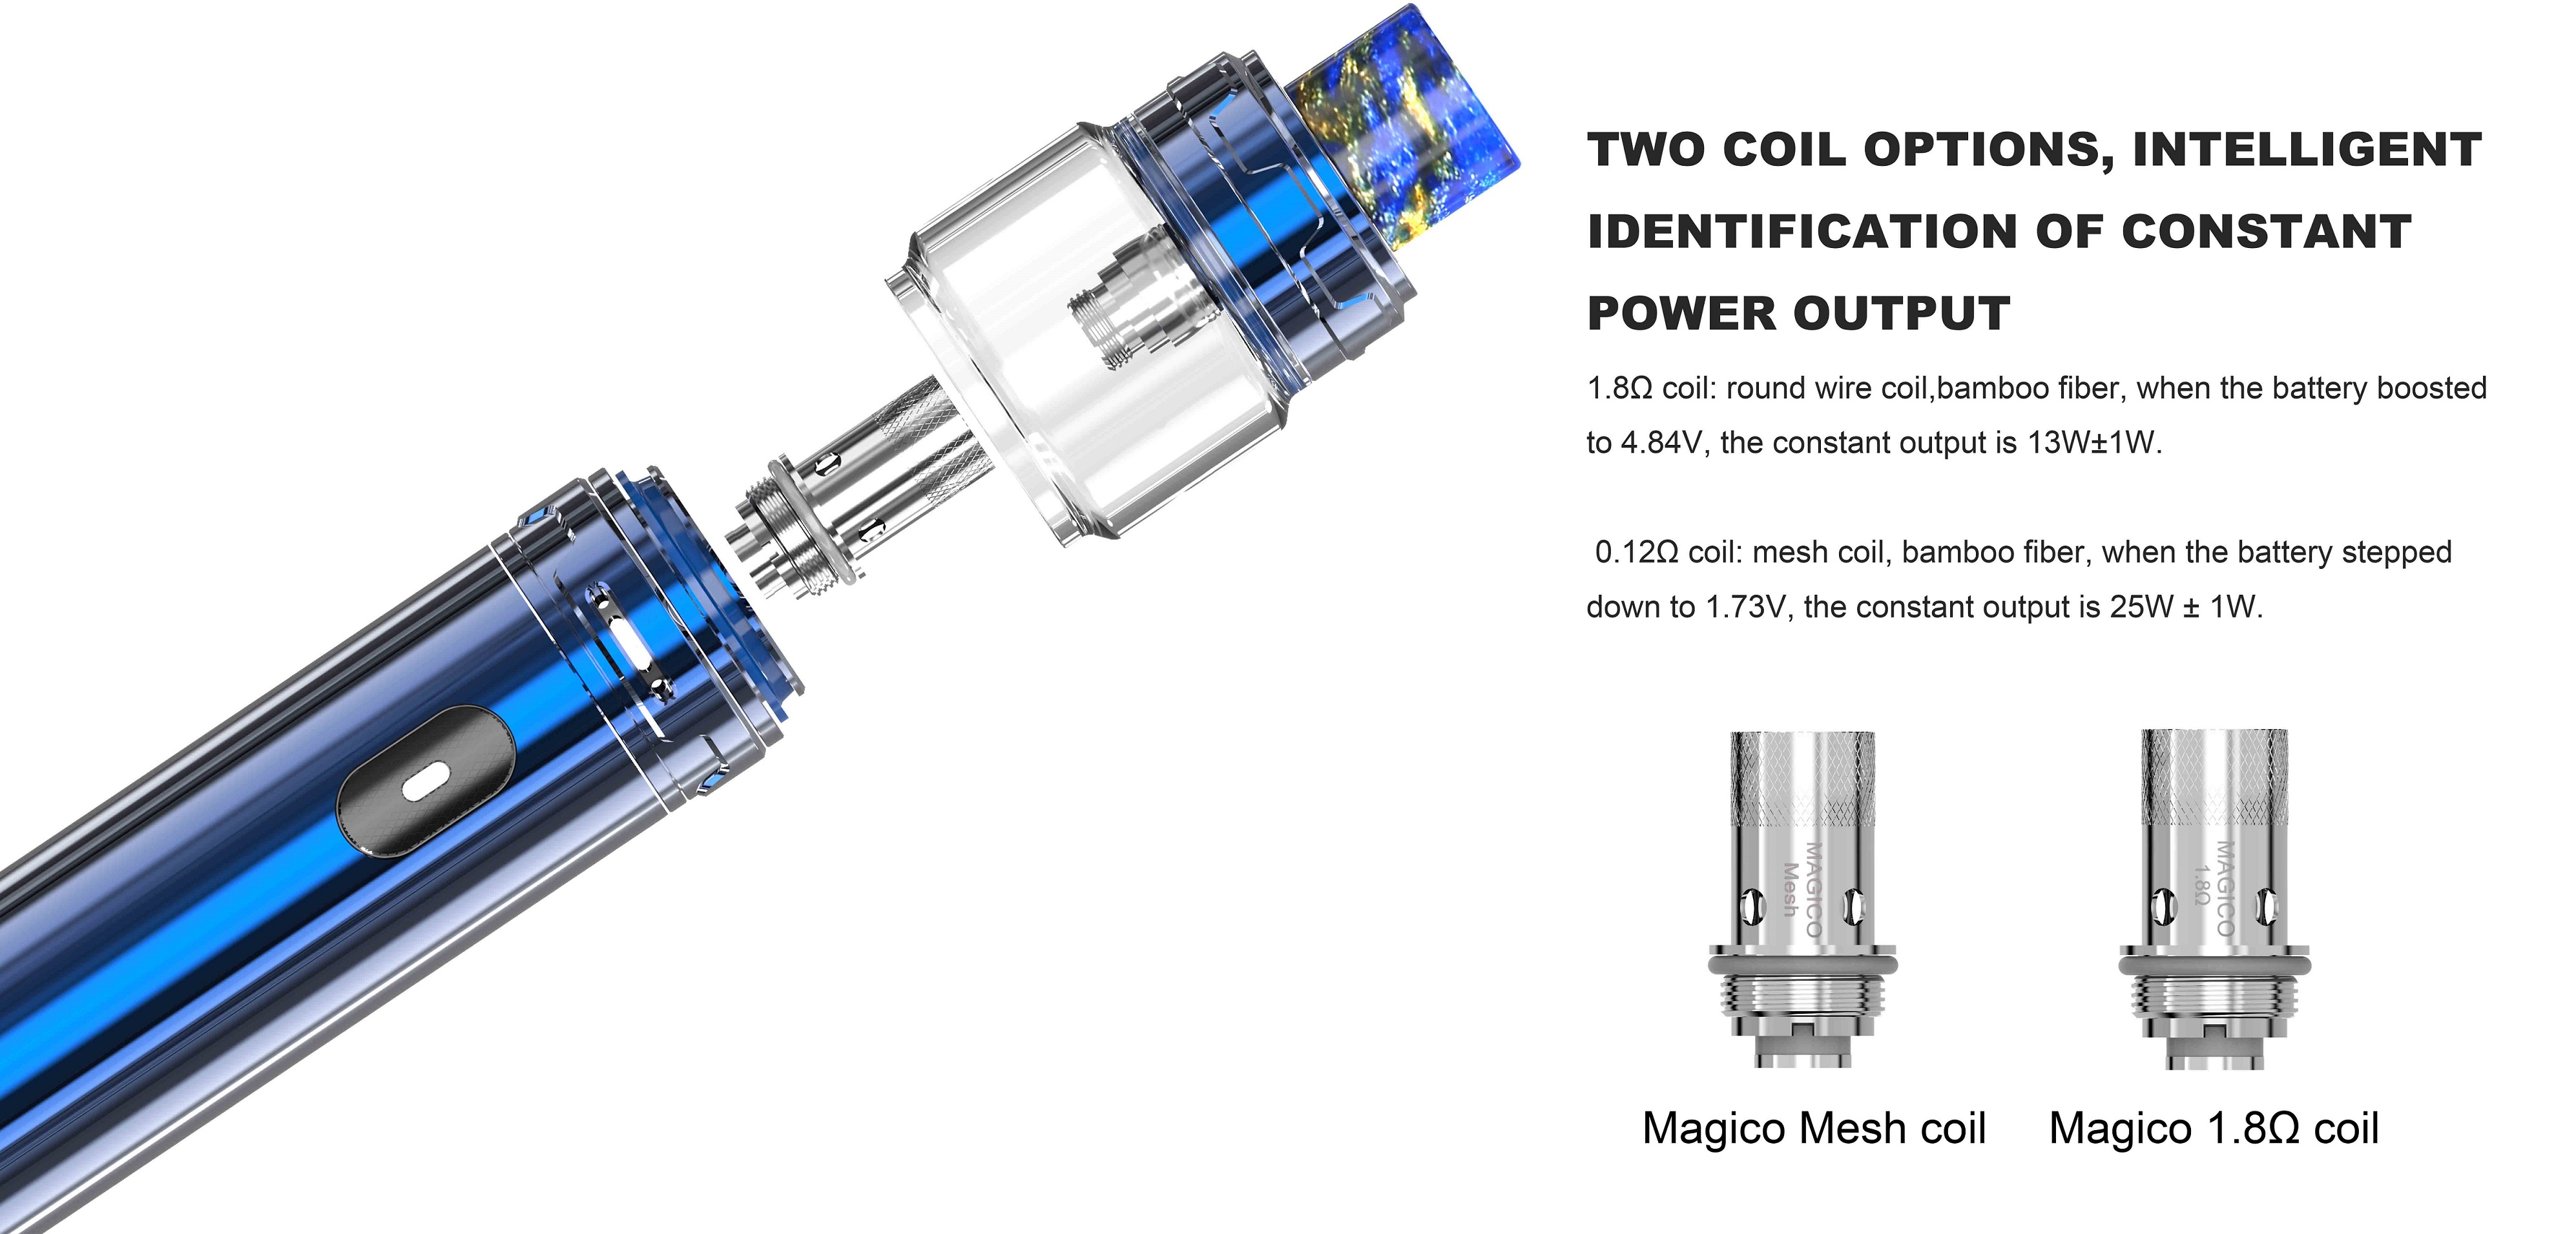 wo coil options, intelligent identification of constant power output